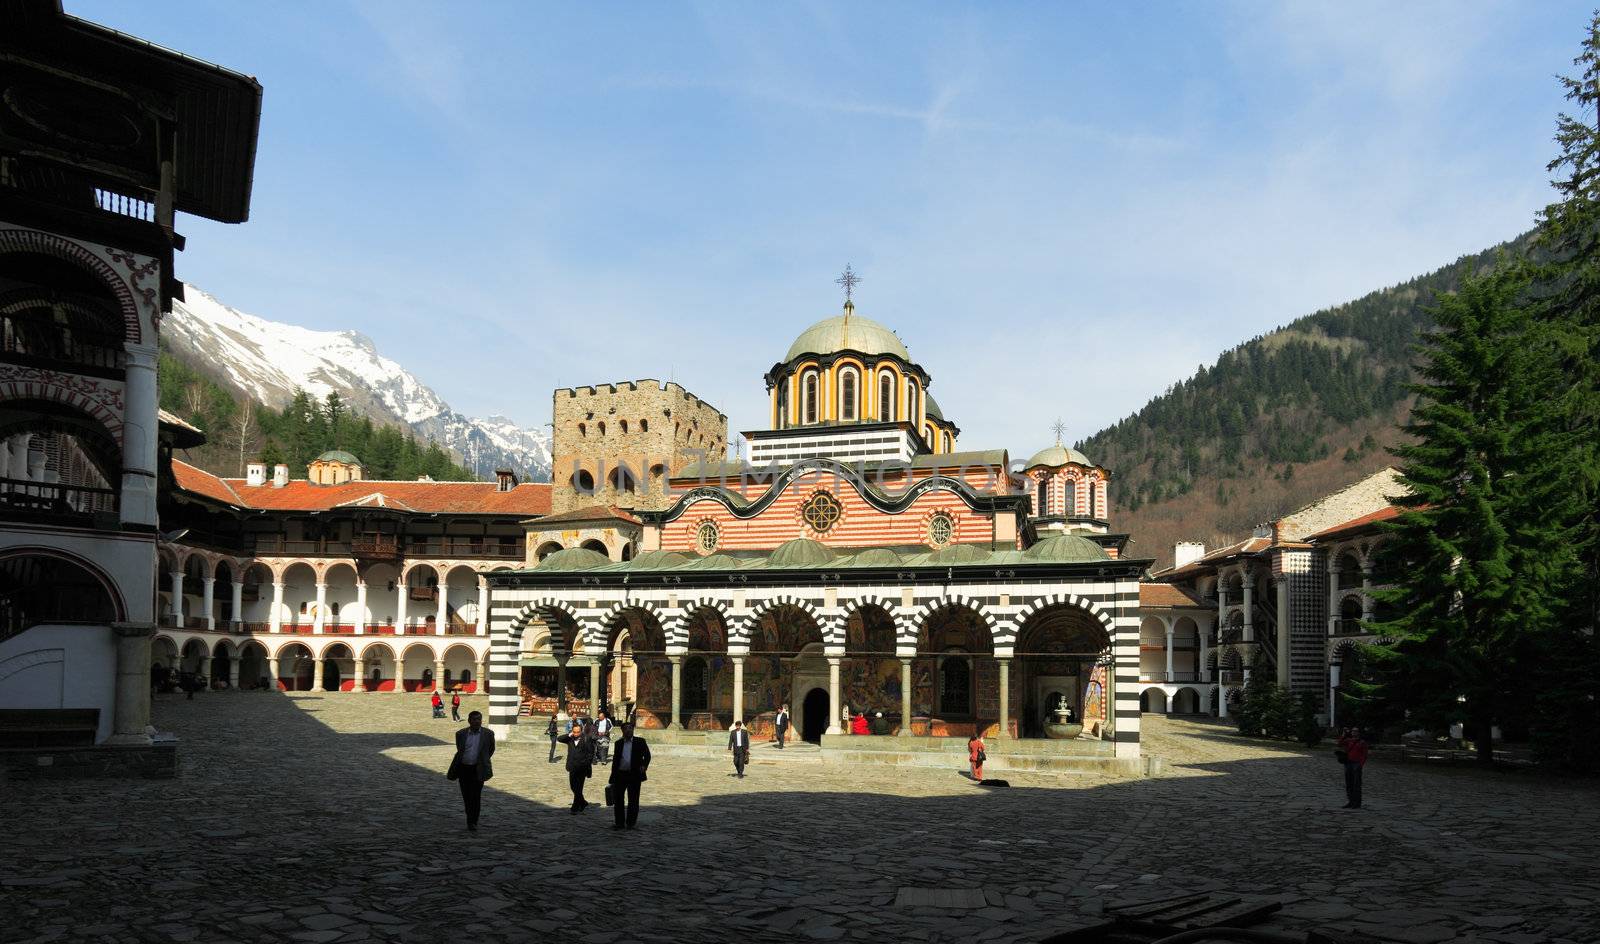 The yard with the church of the Rila monastery